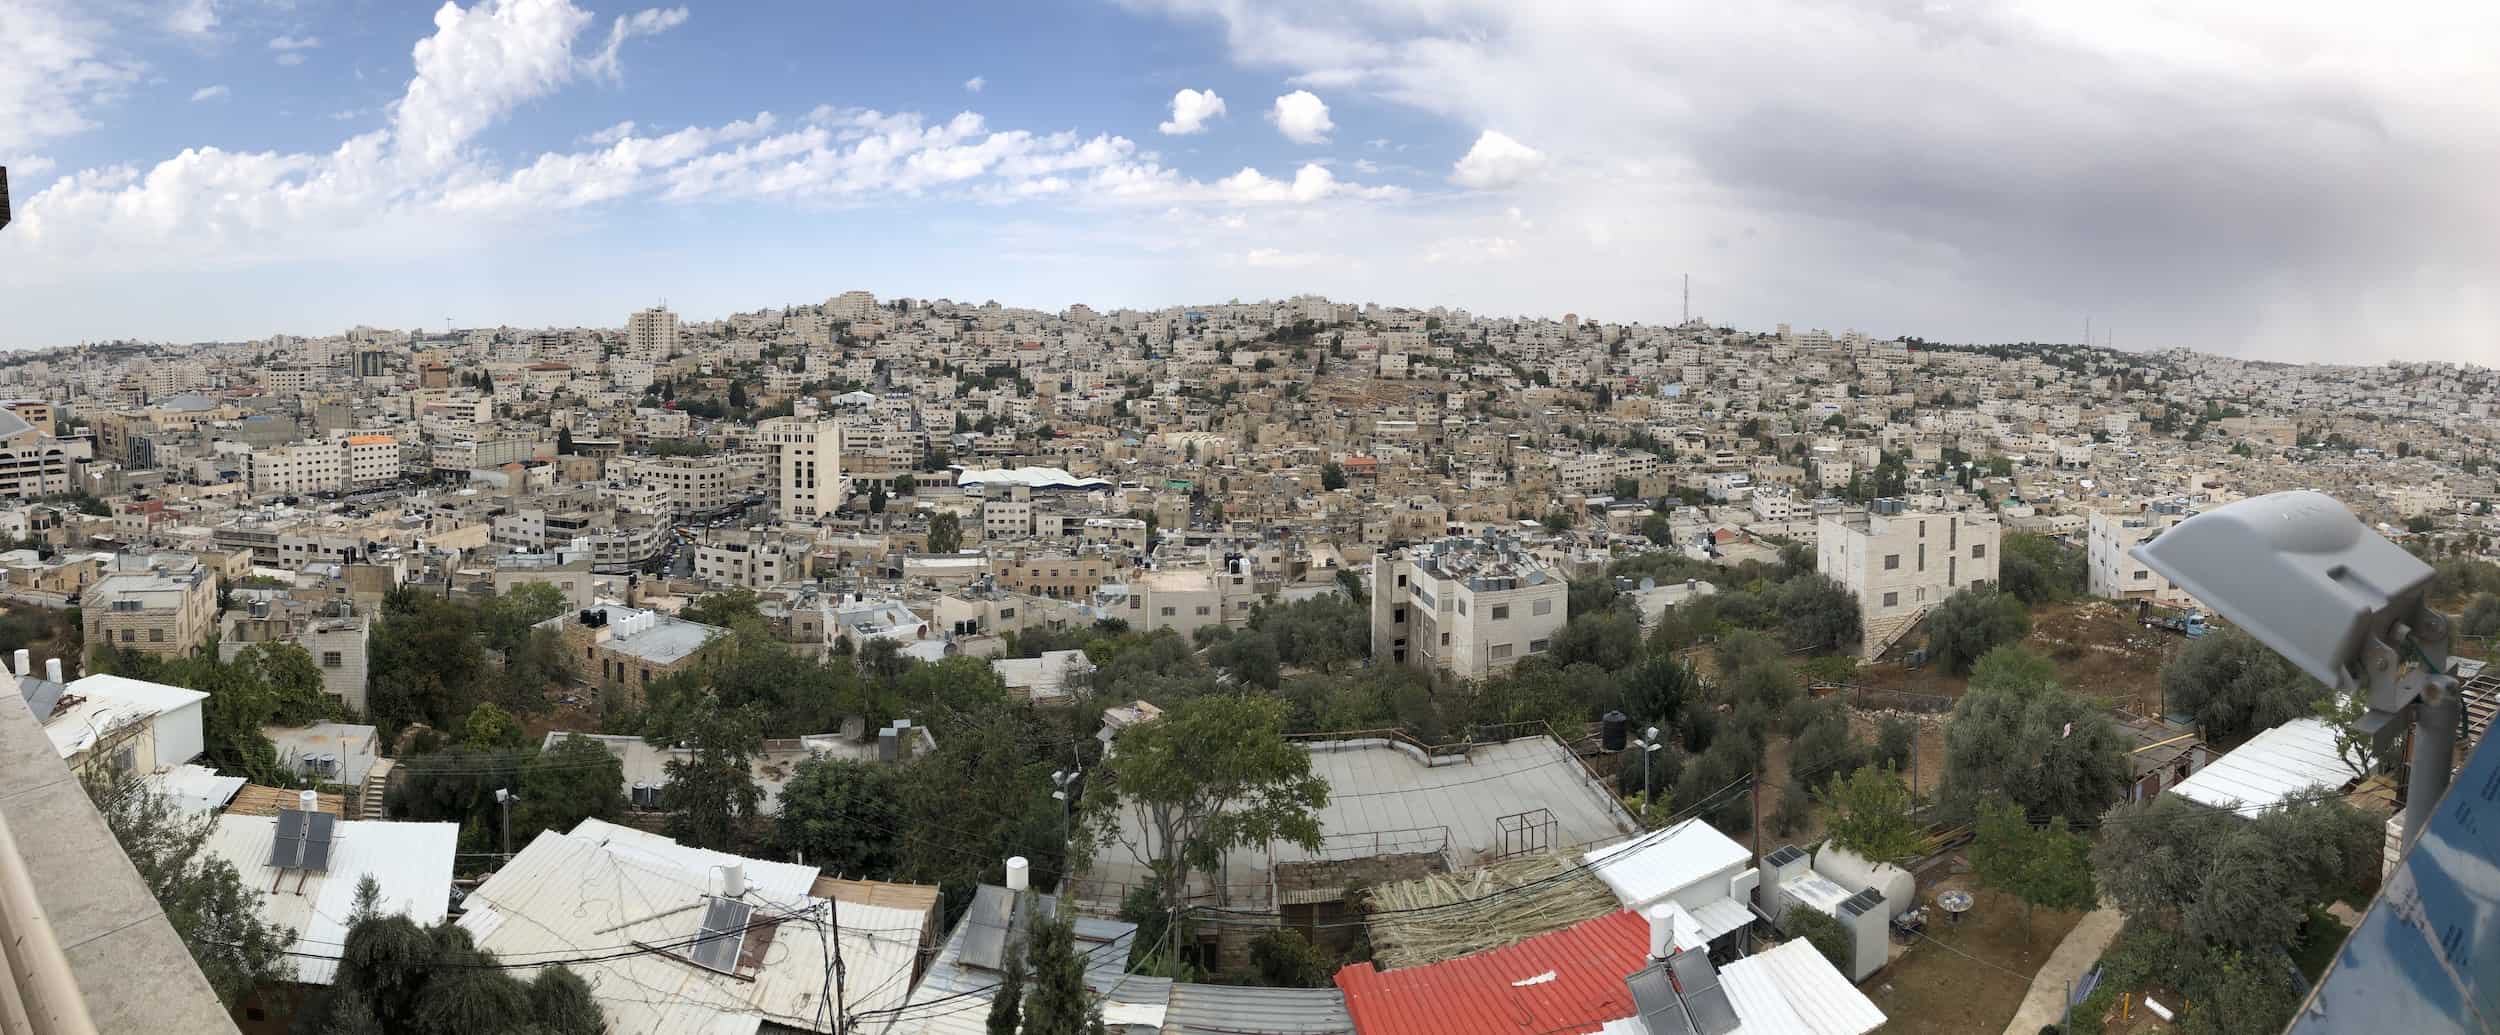 Panoramic view of Hebron from the Hebron Observatory at Tel Rumeida in Hebron, Palestine